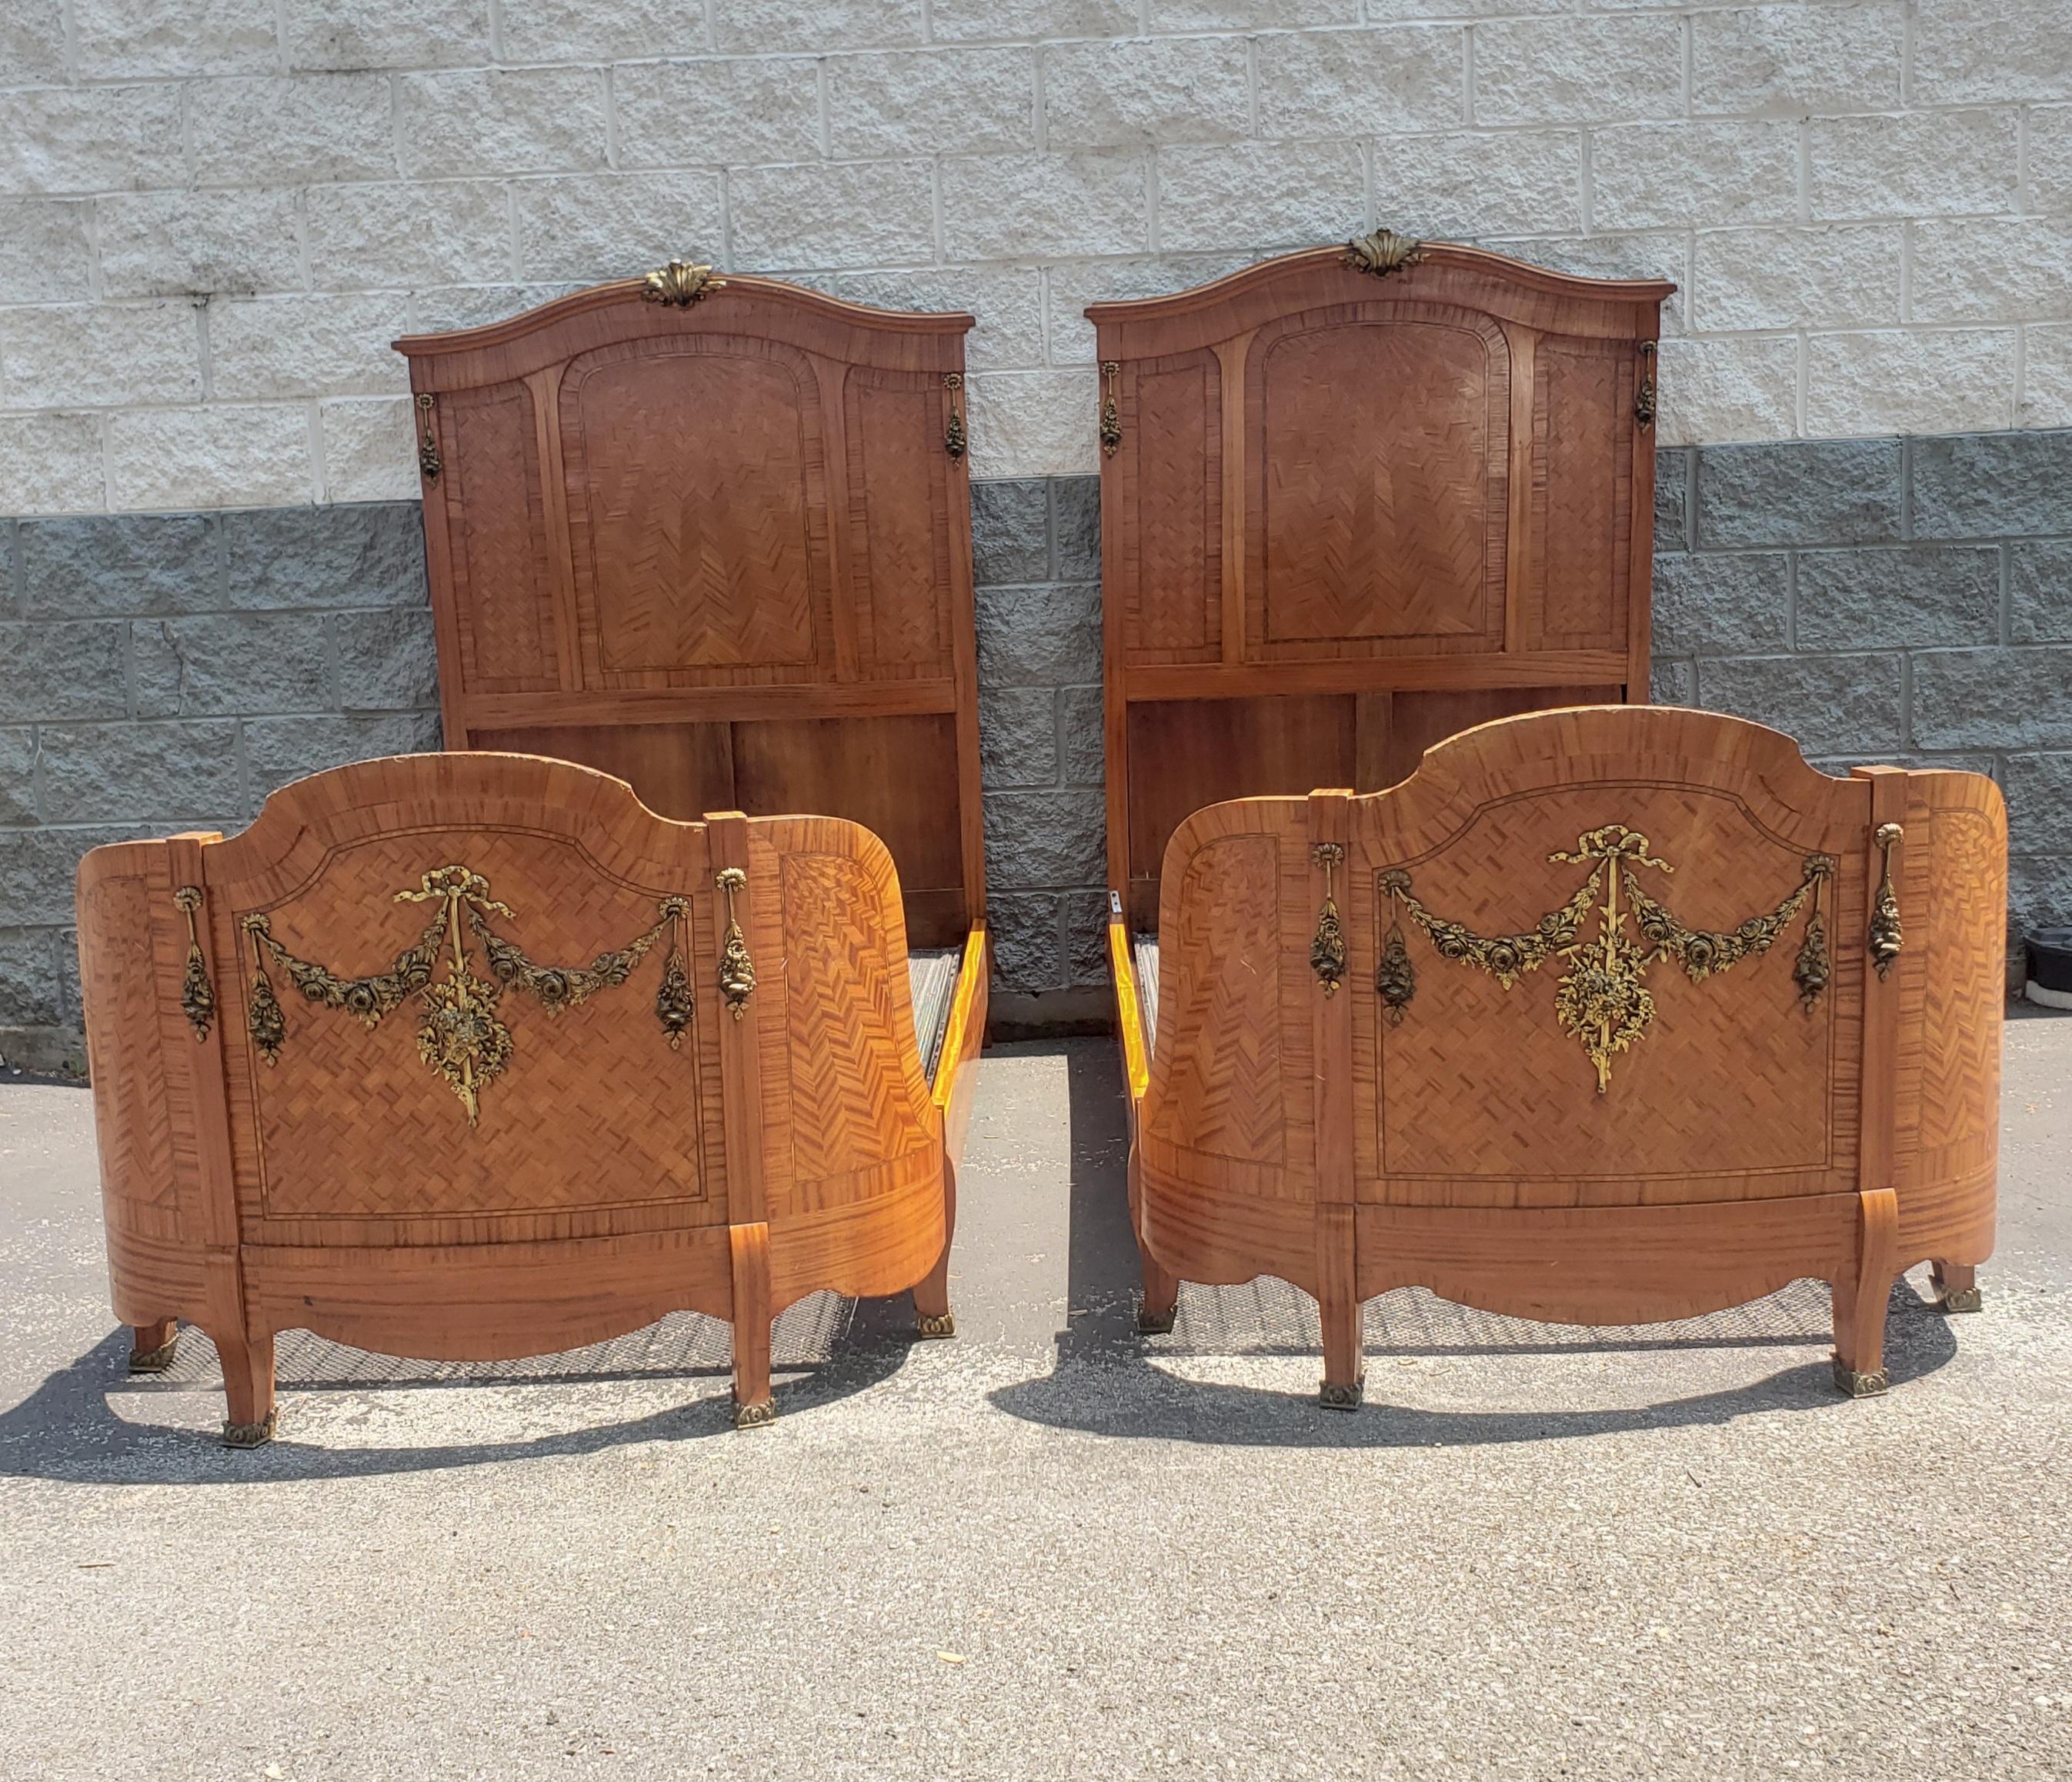 A very impressive good quality pair of late 19th century French Rococo Style parquetry and marquetry inlaid twin size bedsteads. Feautures intricate ormolu mounts on headboard and footboards. Ormolu brass caps on footboard legs. Half round footboard